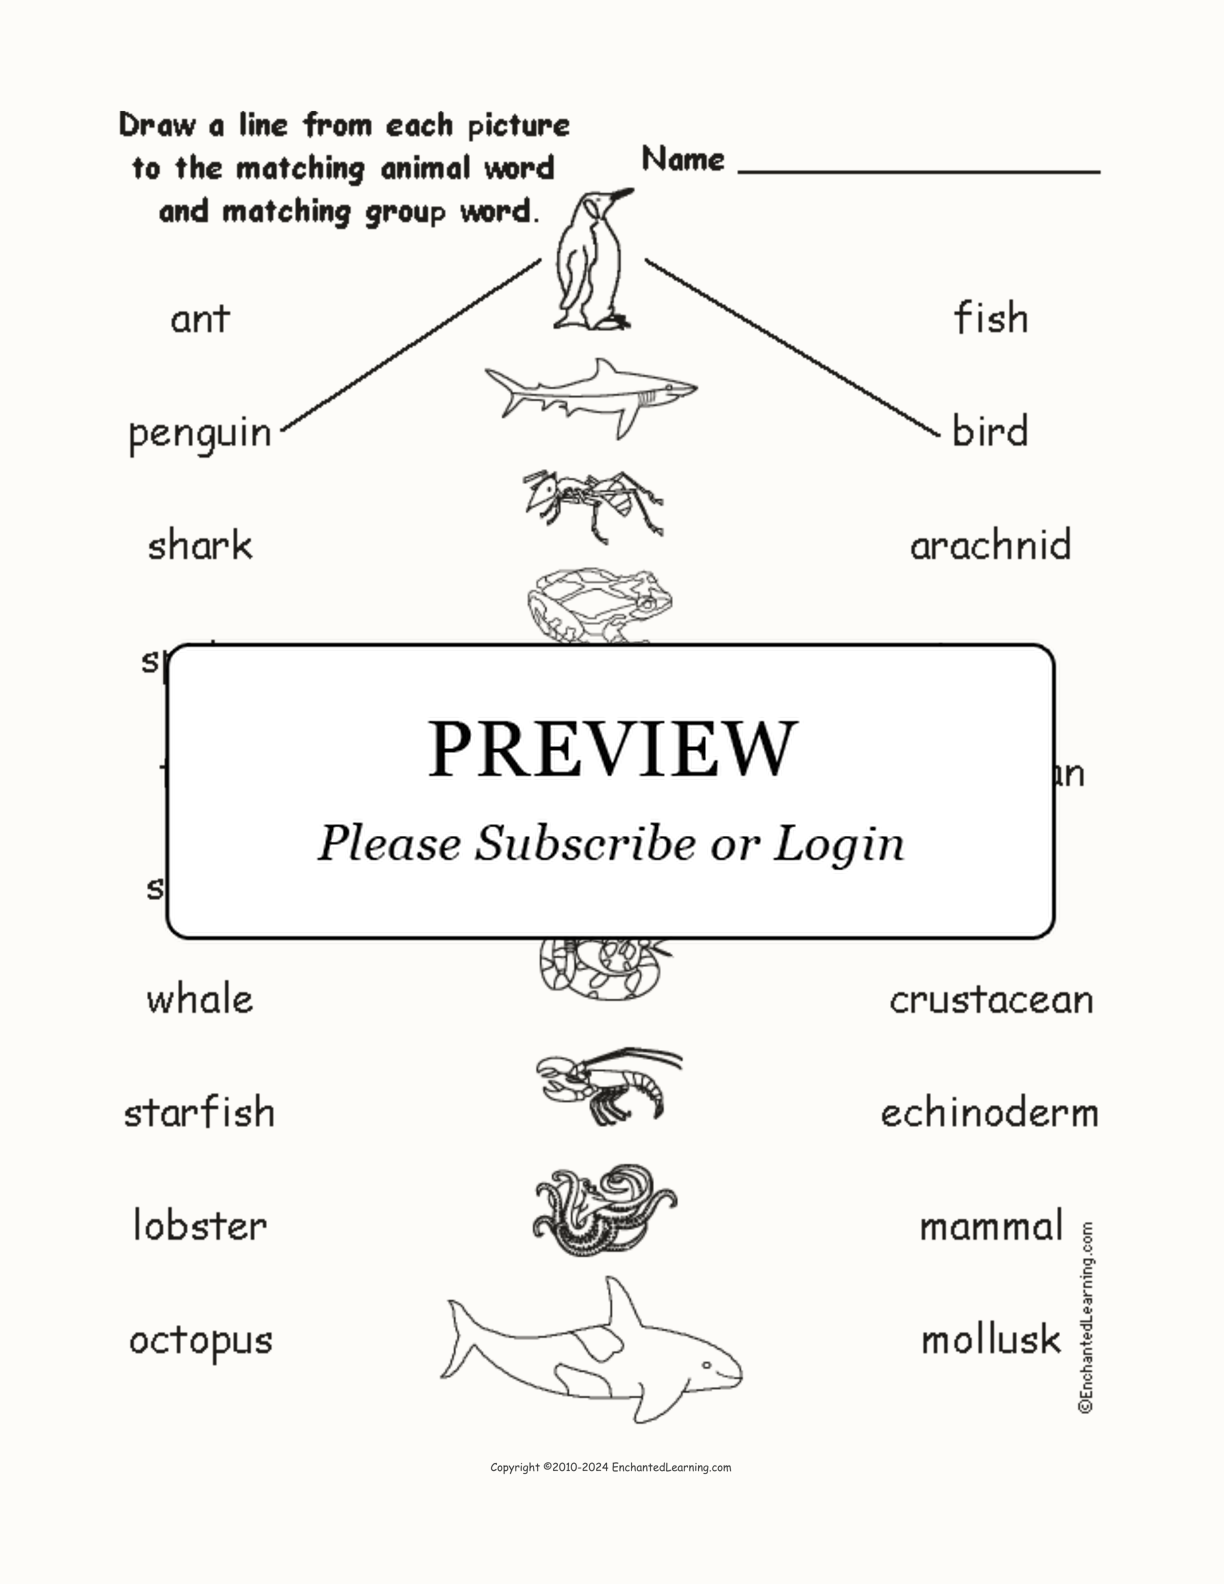 Animal Groups #1 - Match the Words to the Pictures interactive worksheet page 1